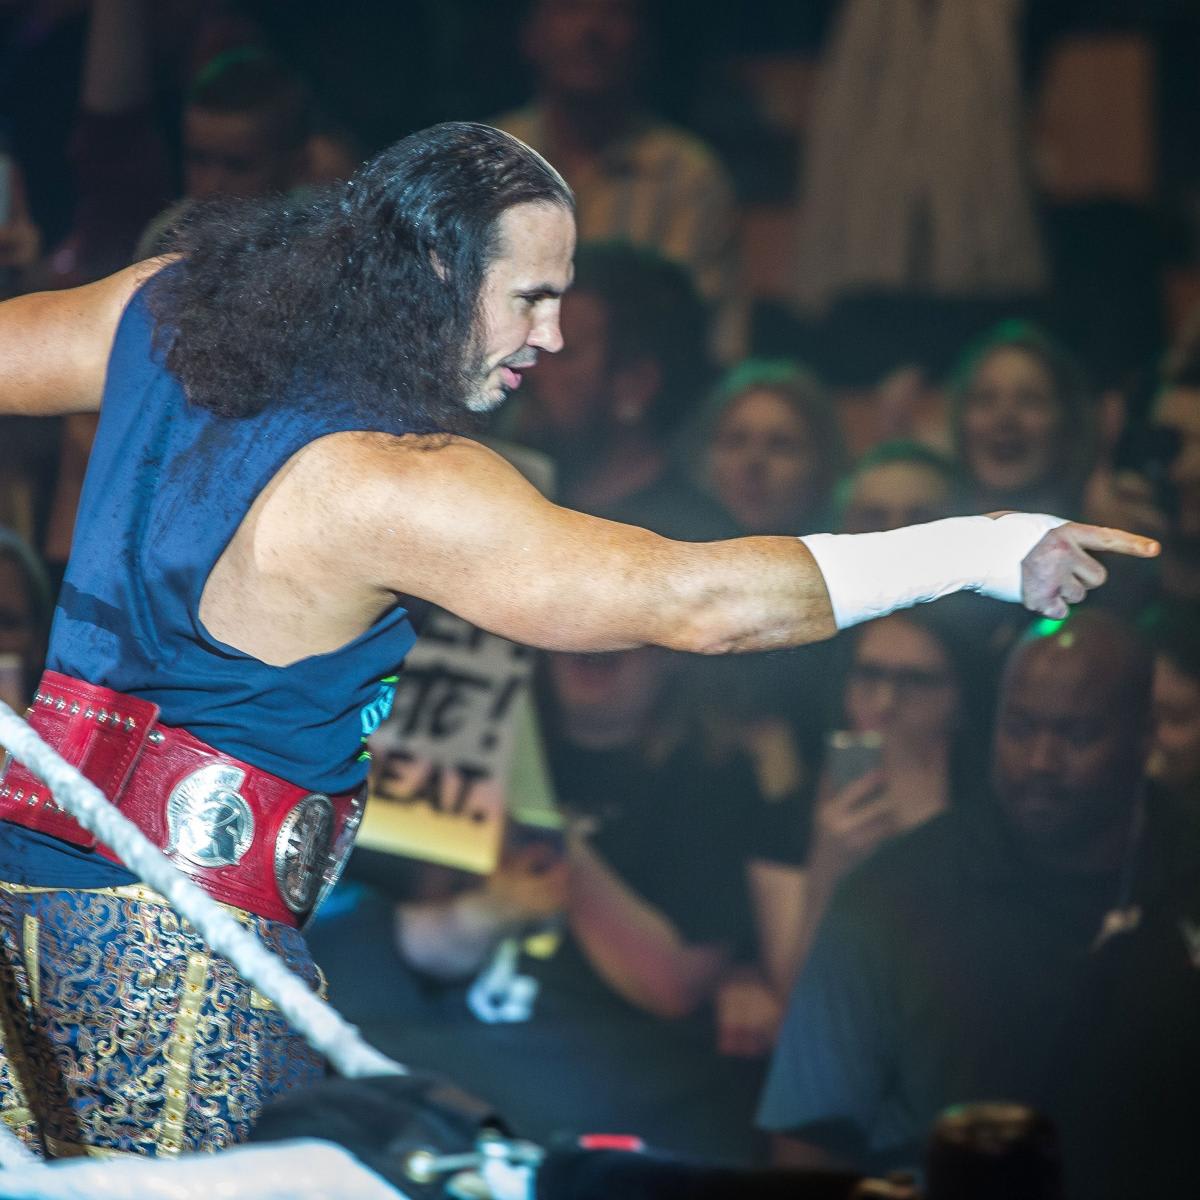 Matt Hardy Teases AEW in Cryptic Tweet About WWE Future After Orton's Attack